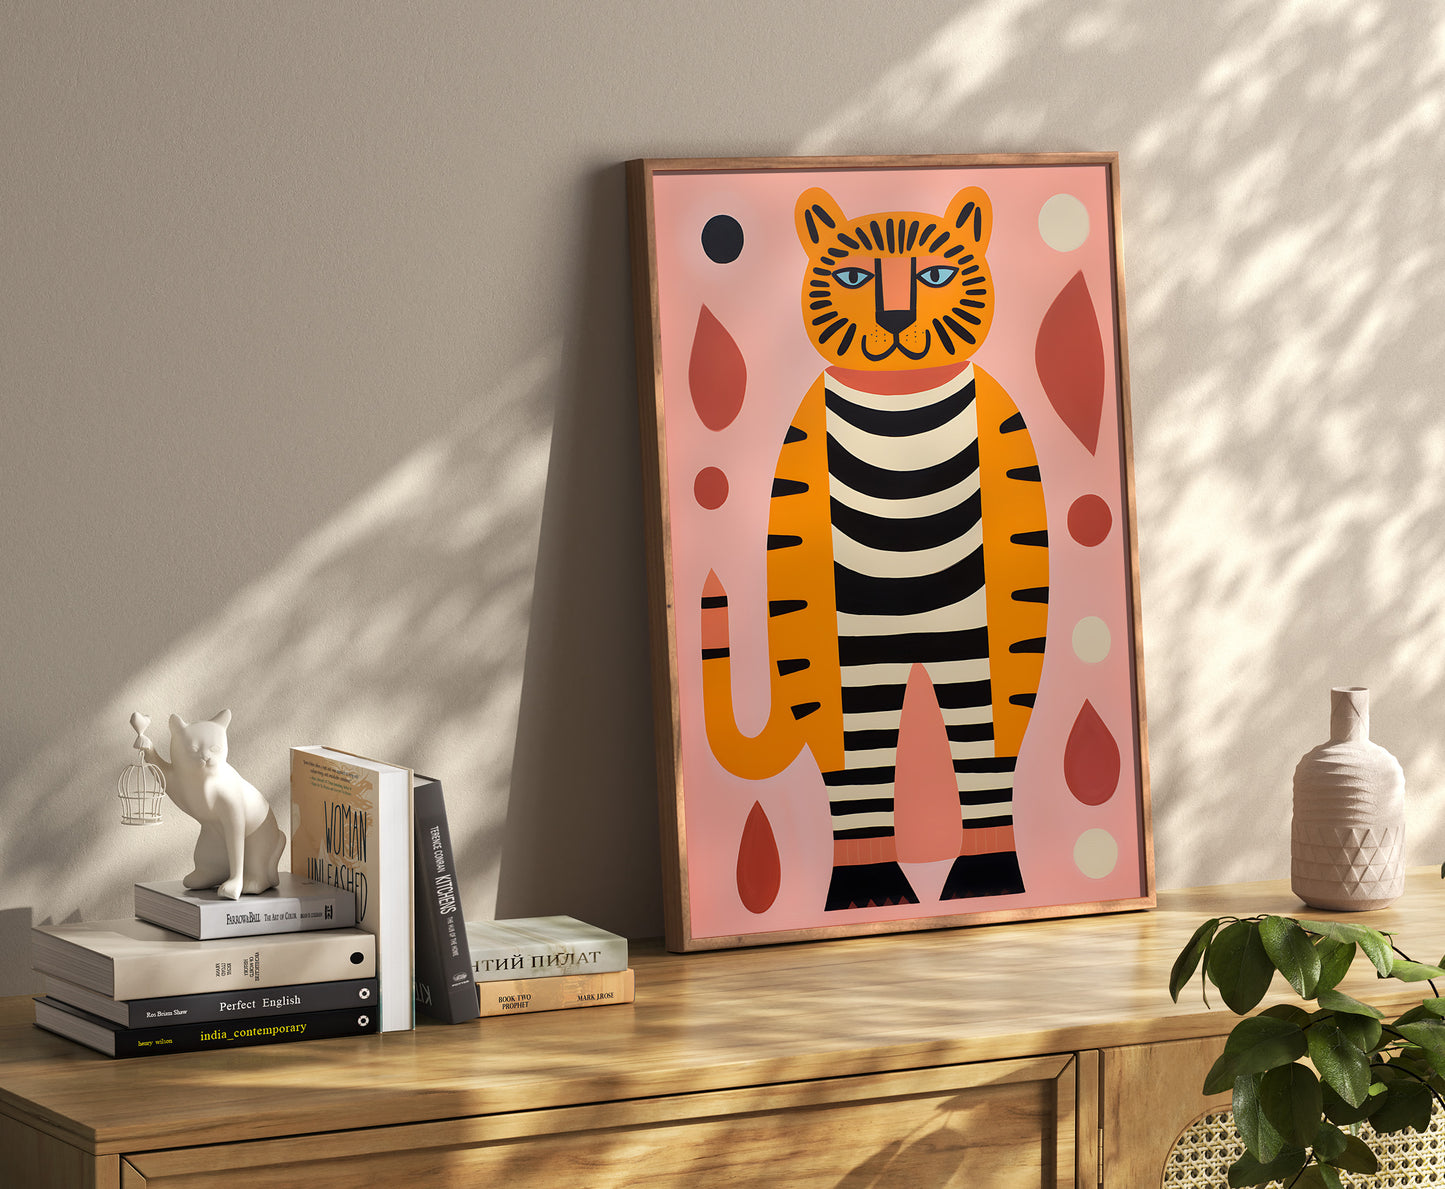 A colorful framed illustration of an abstract cat standing upright, displayed in a stylish room.